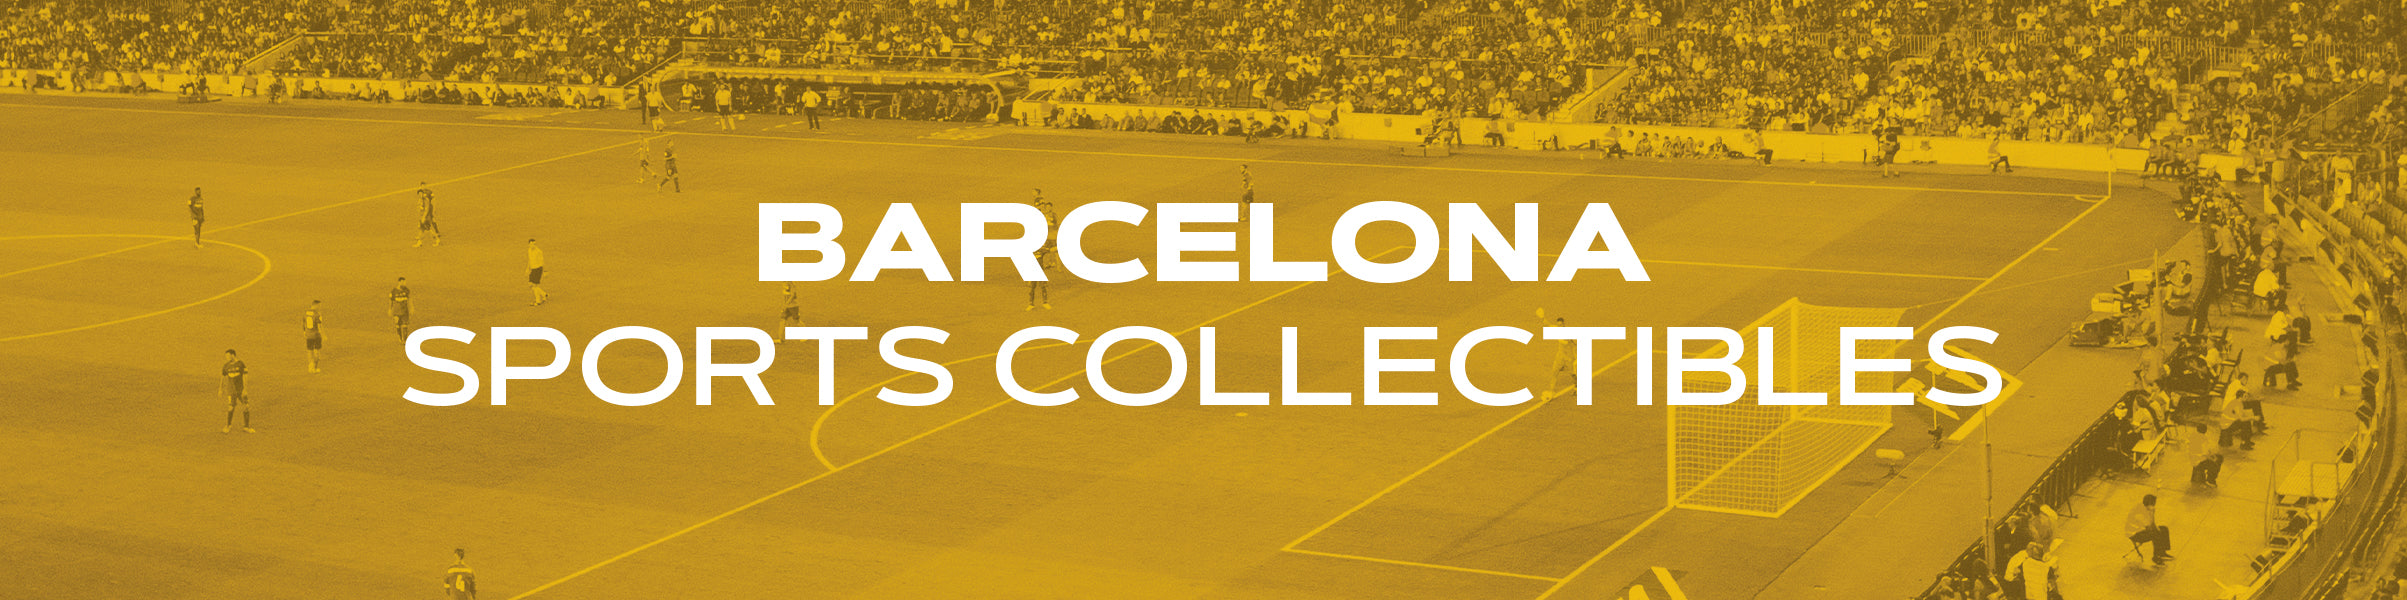 Barcelona Sports Collectibles